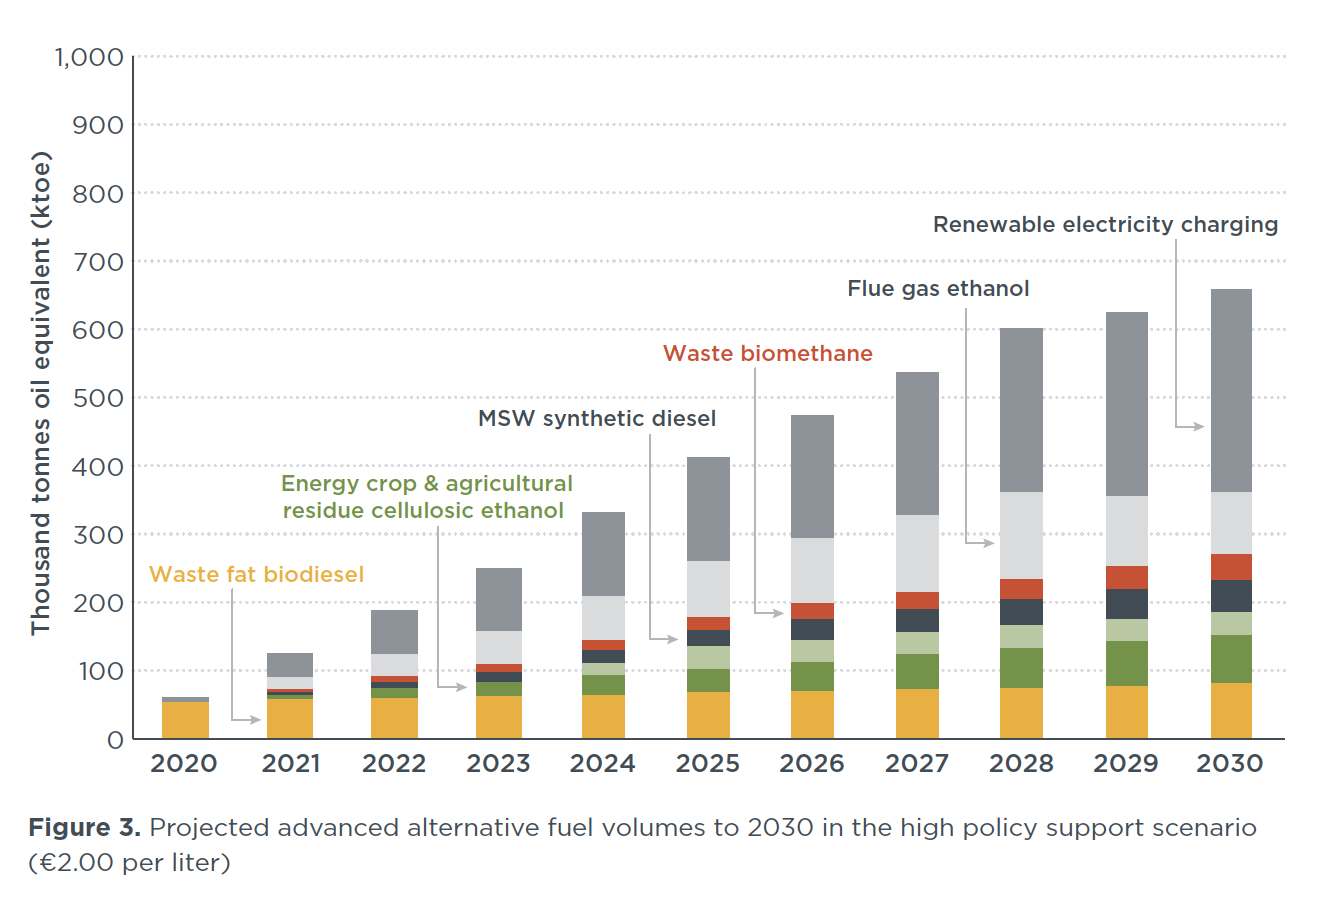 Figure 3. Projected advanced alternative fuel volumes to 2030 in the high policy support scenario